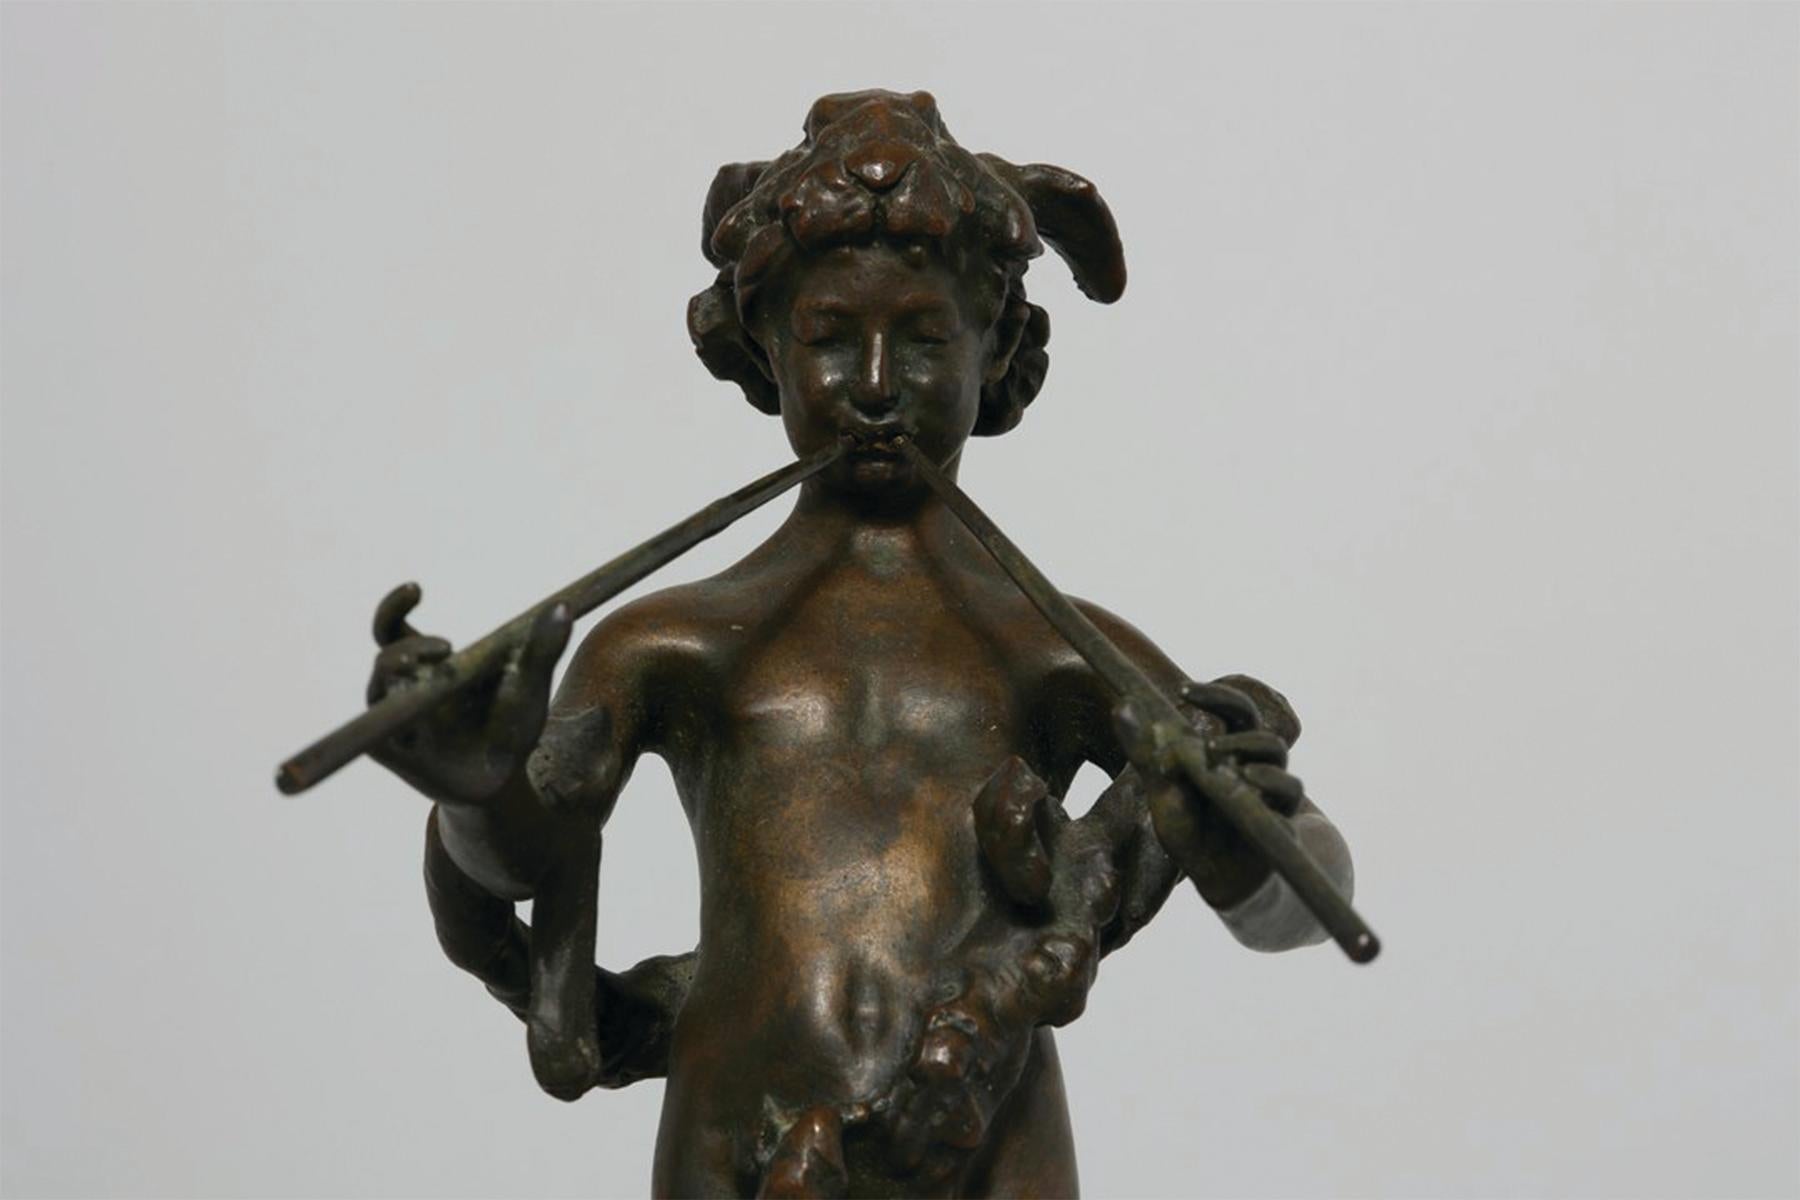 Pan of Rohallion, 1889-90 classical bronze sculpture For Sale 2